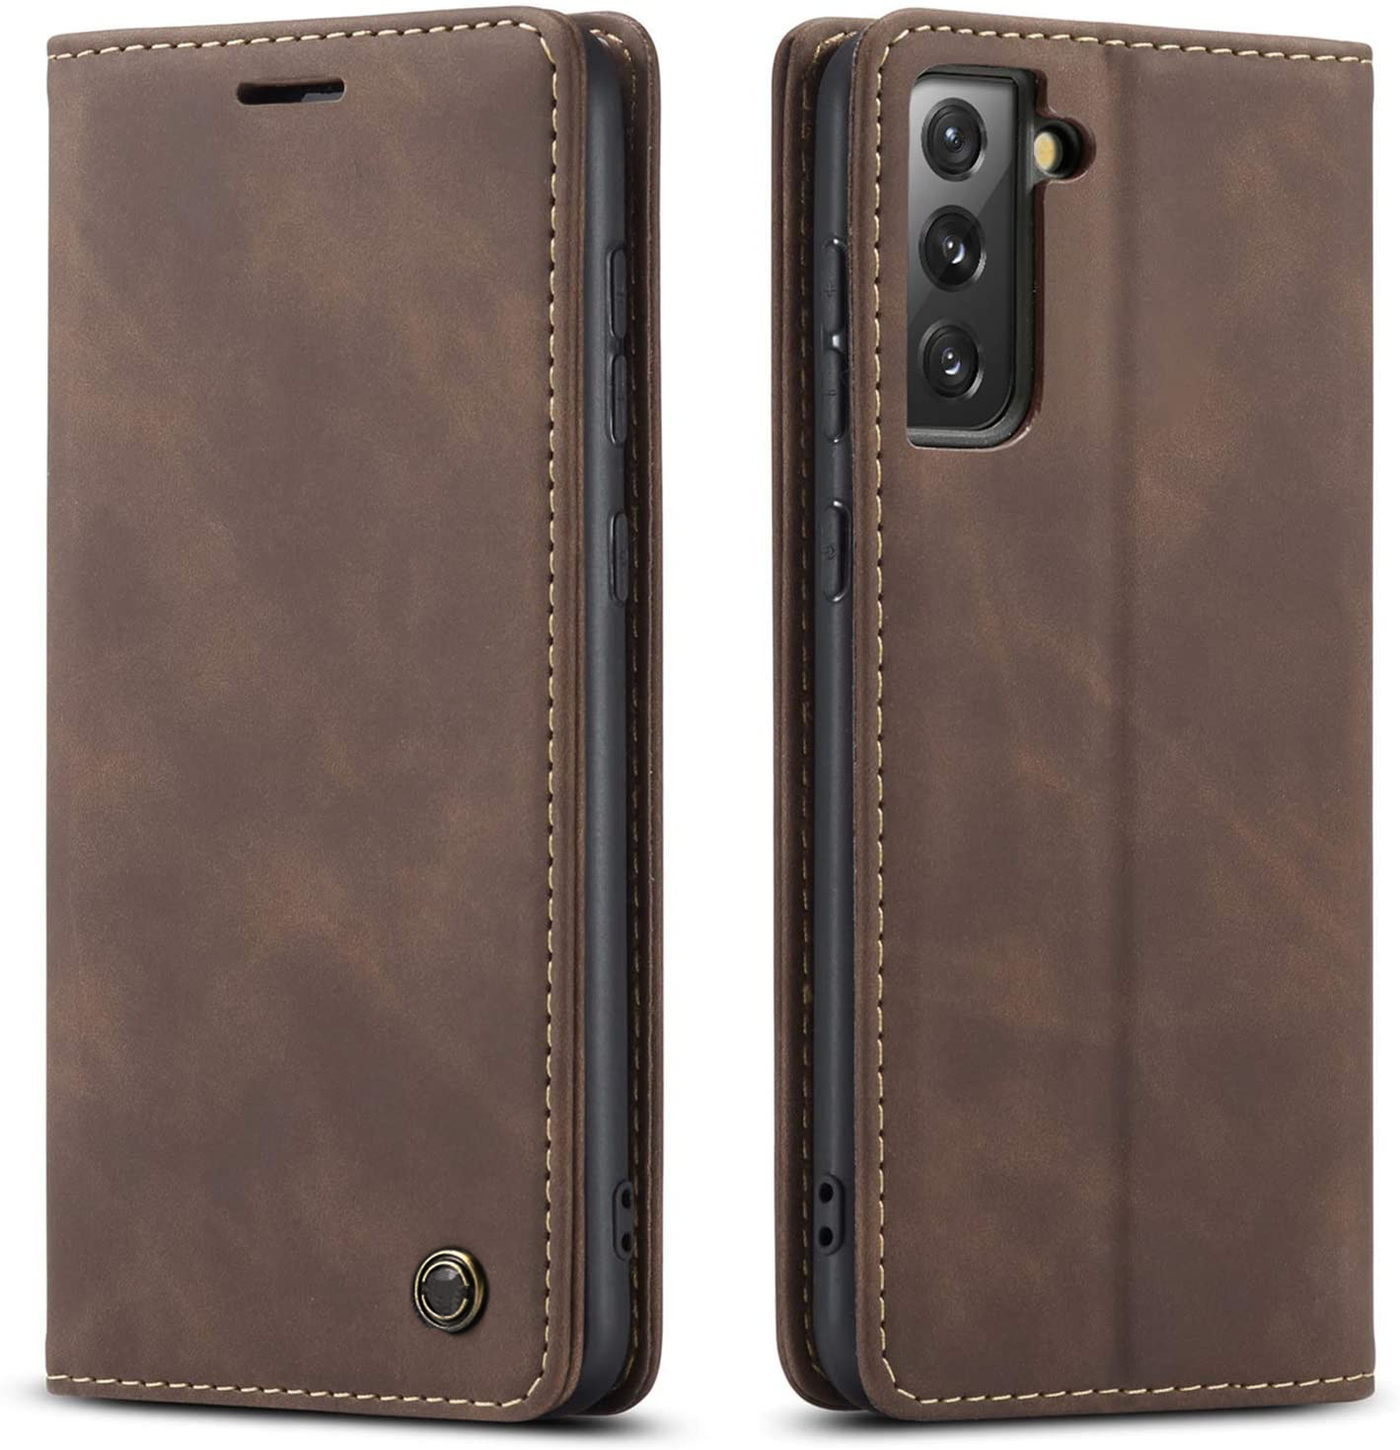 Samsung Galaxy S21 5G coffee color leather wallet flip cover case By excelsior